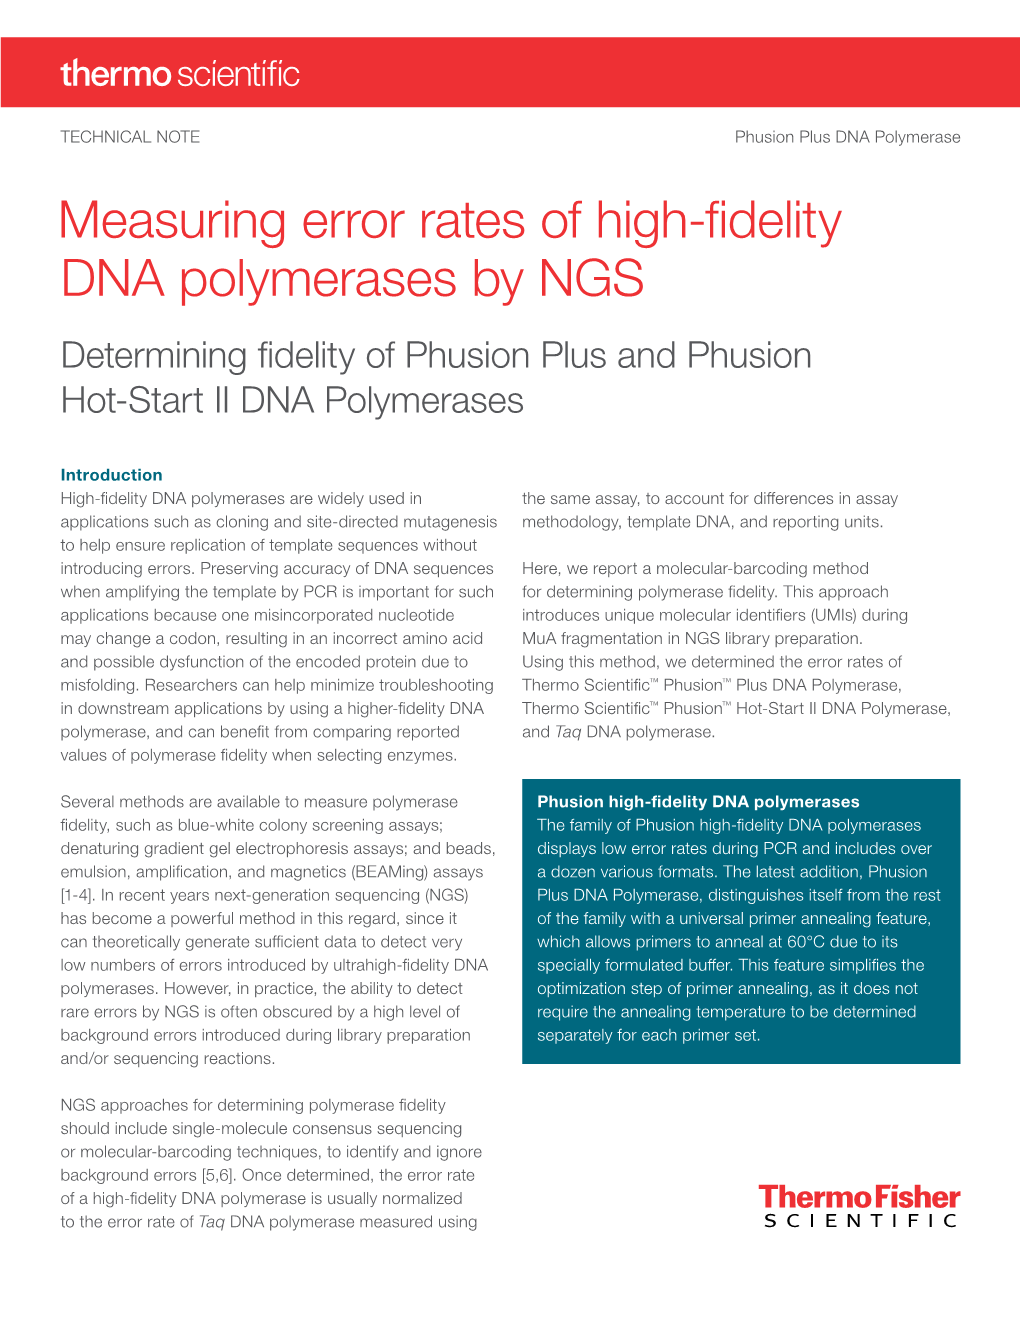 Measuring Error Rates of High-Fidelity DNA Polymerases by NGS Determining Fidelity of Phusion Plus and Phusion Hot-Start II DNA Polymerases